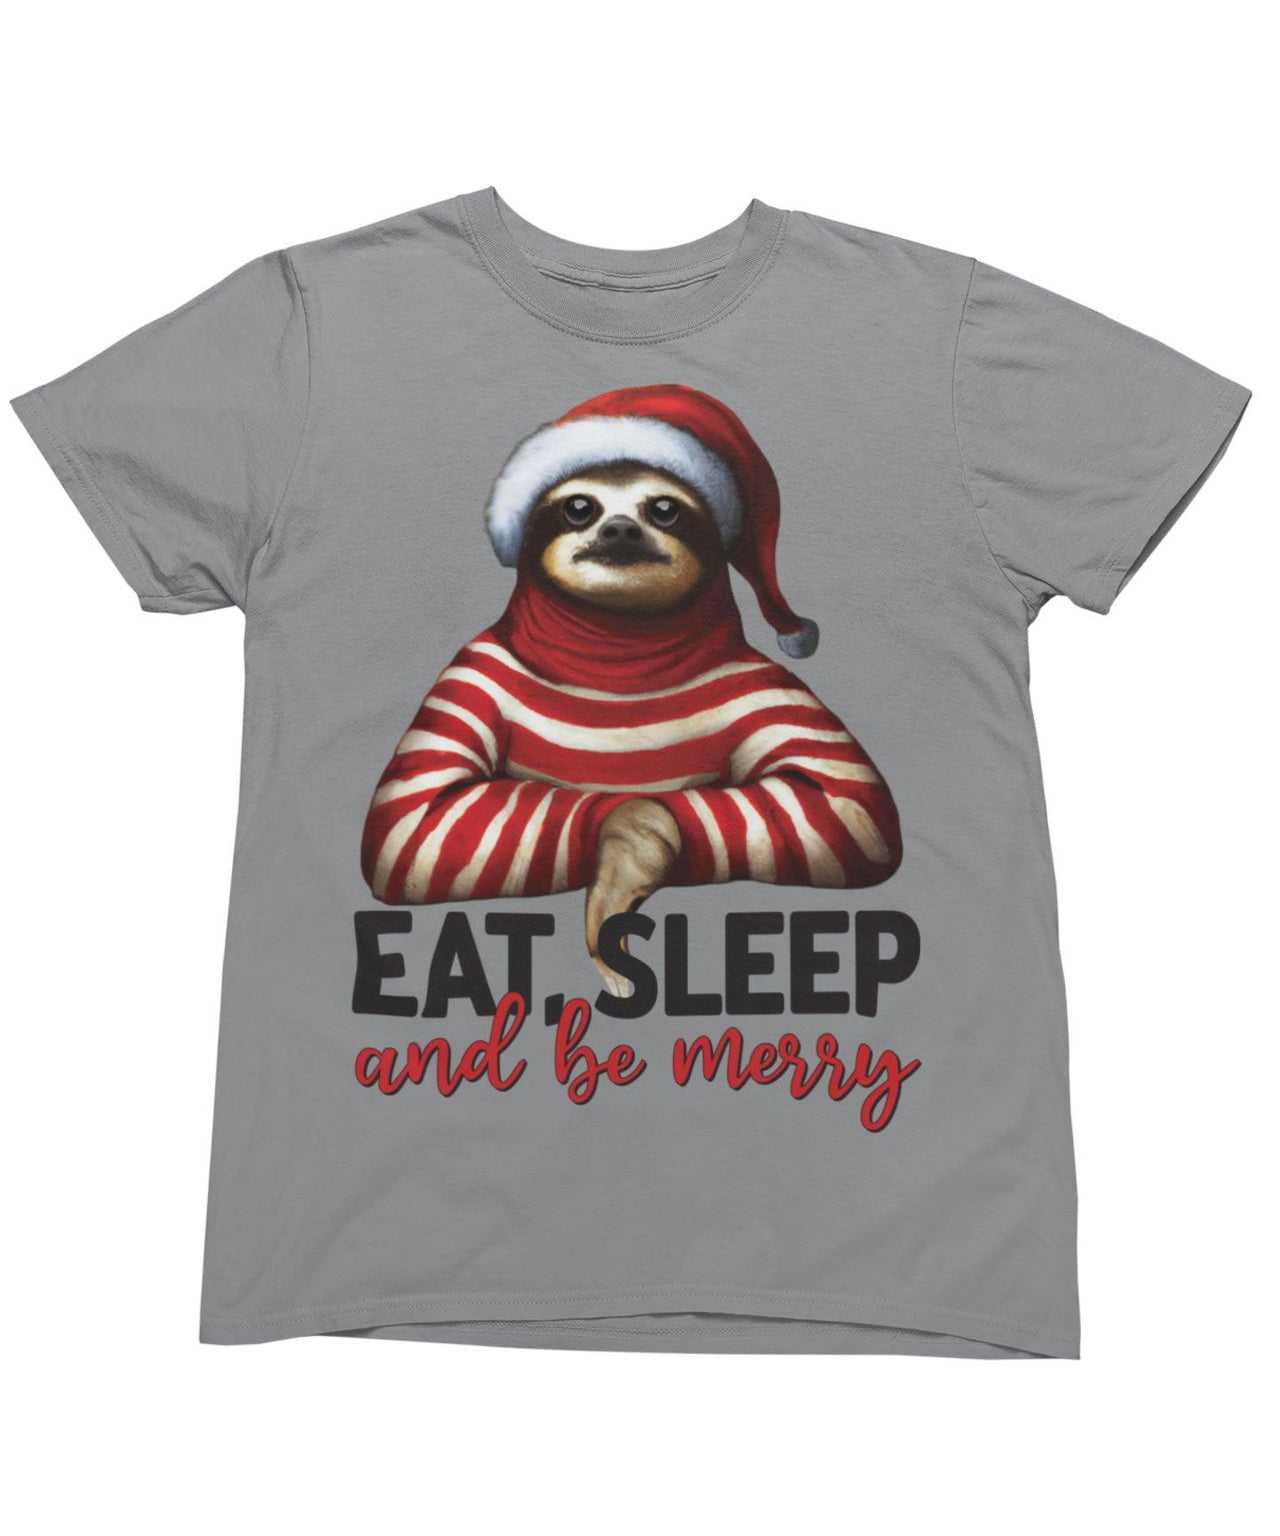 Sloth Eat Sleep And Be Merry Christmas Unisex T-Shirt For Men 8Ball